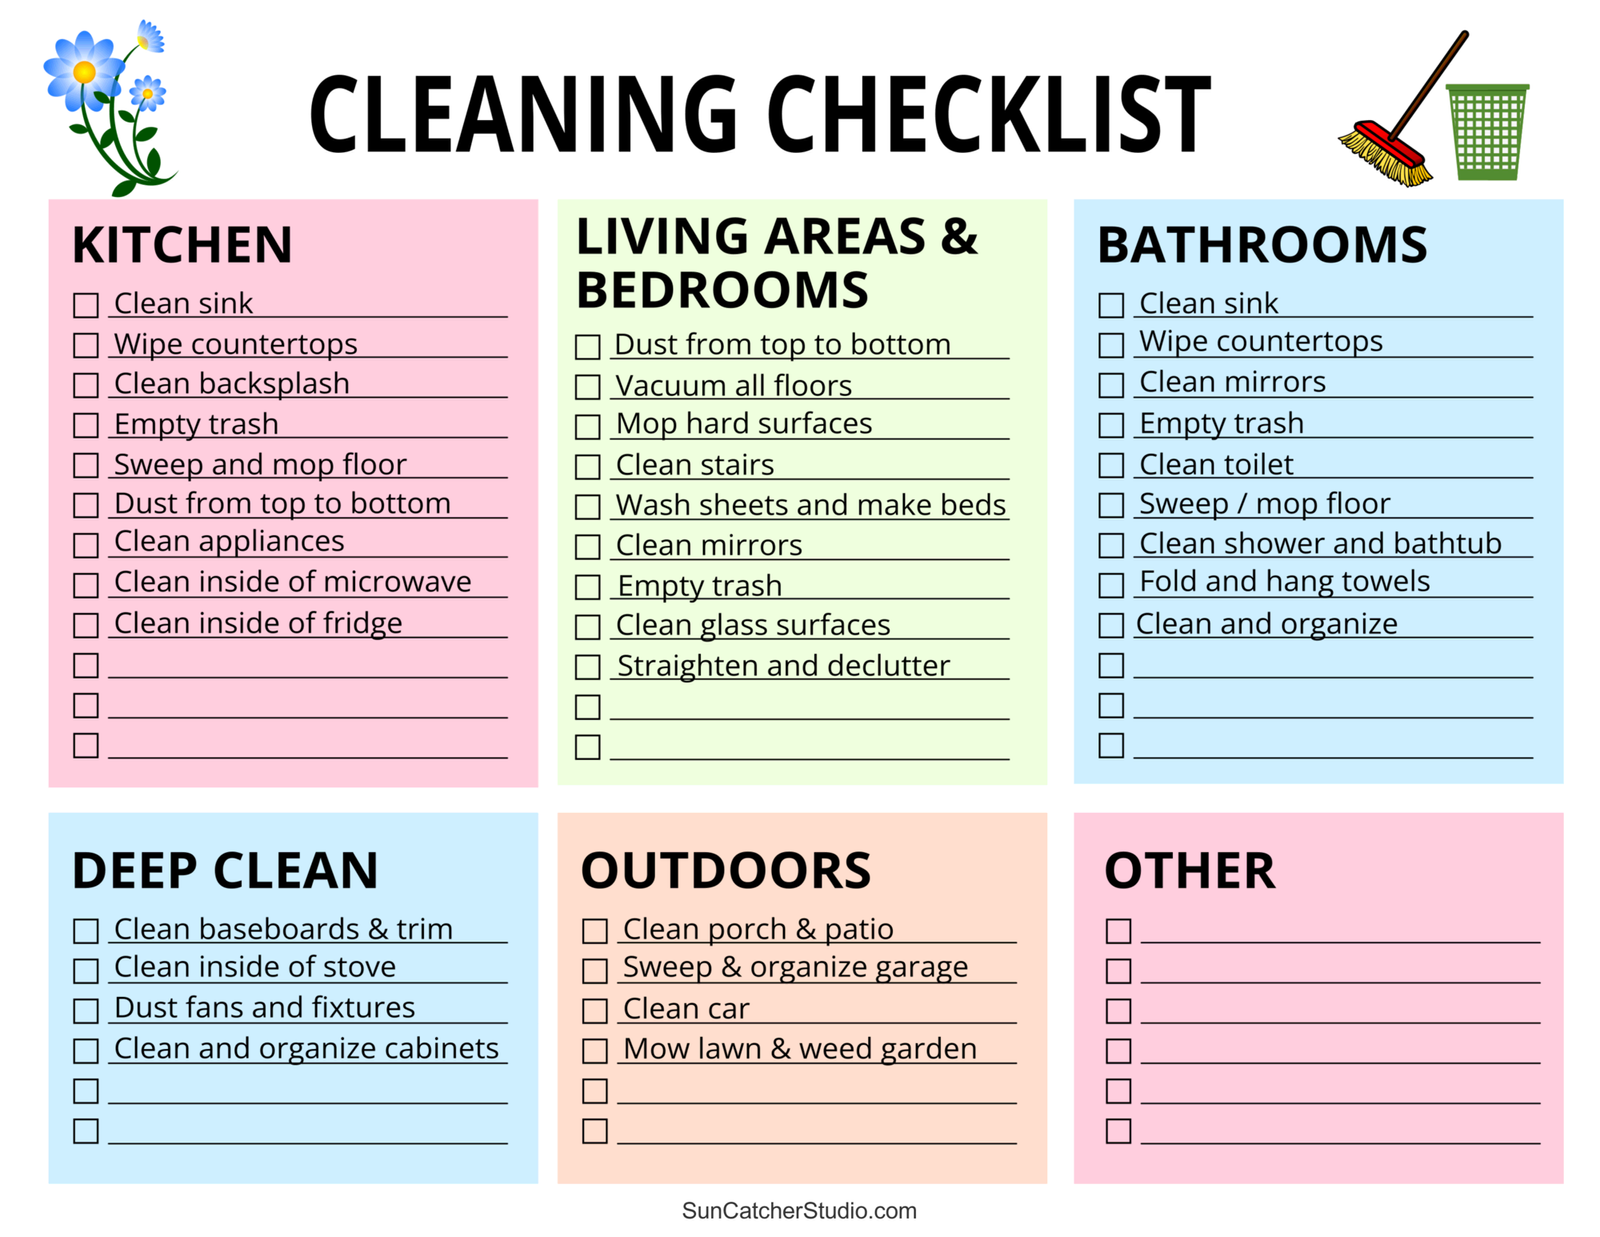 How to Create a Cleaning Schedule in Dubai